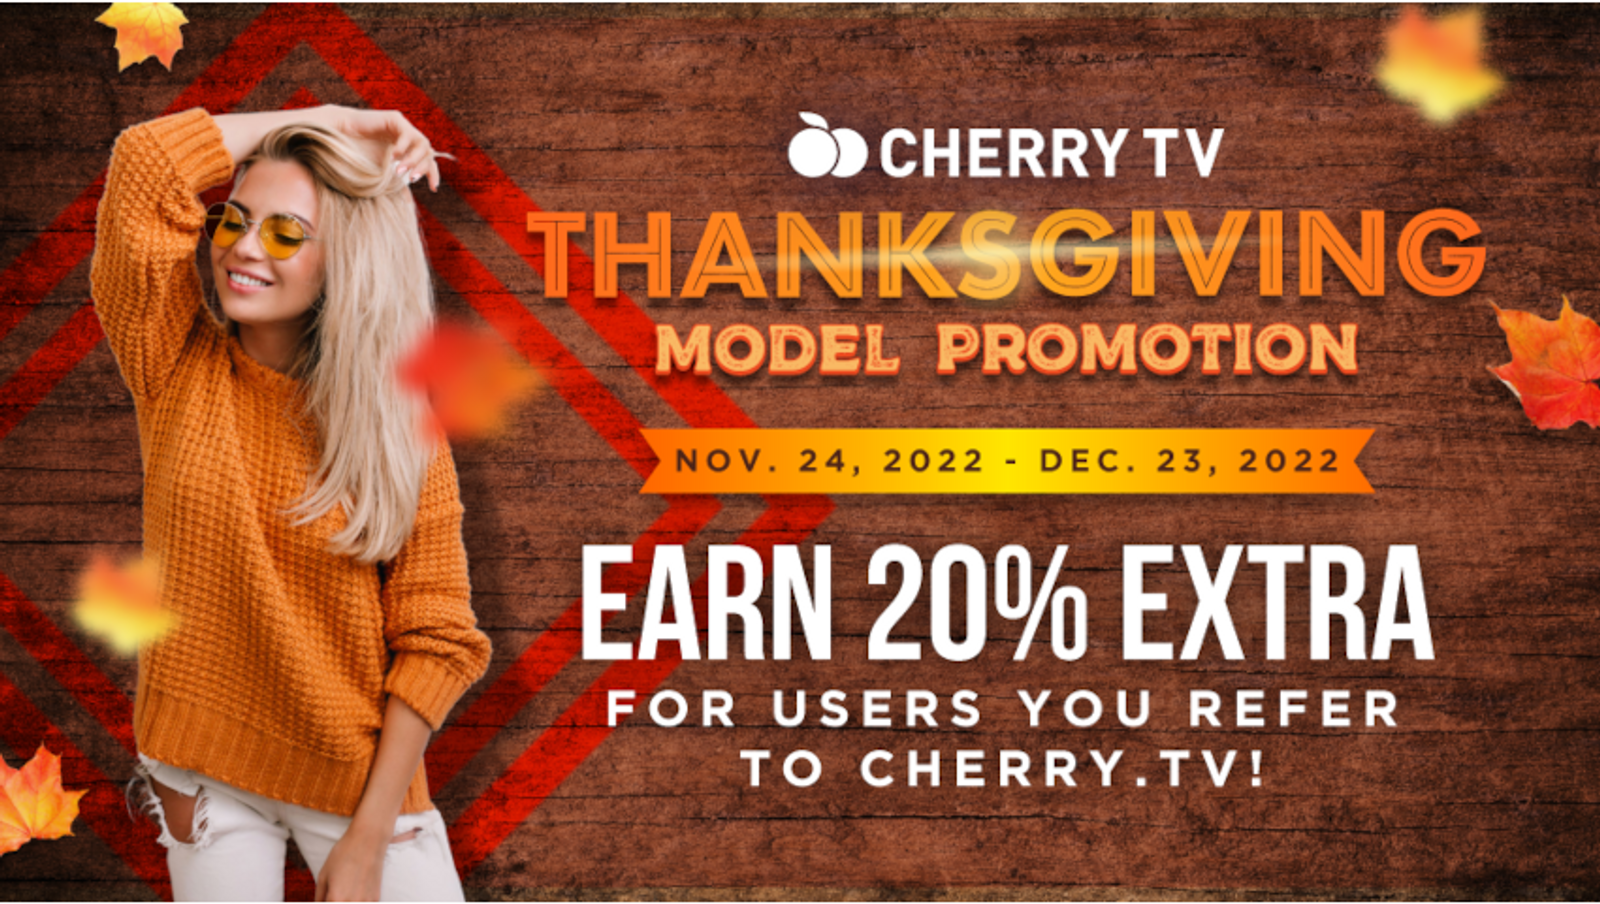 Cherry.tv Announces Holiday Model Rev Share Promotion